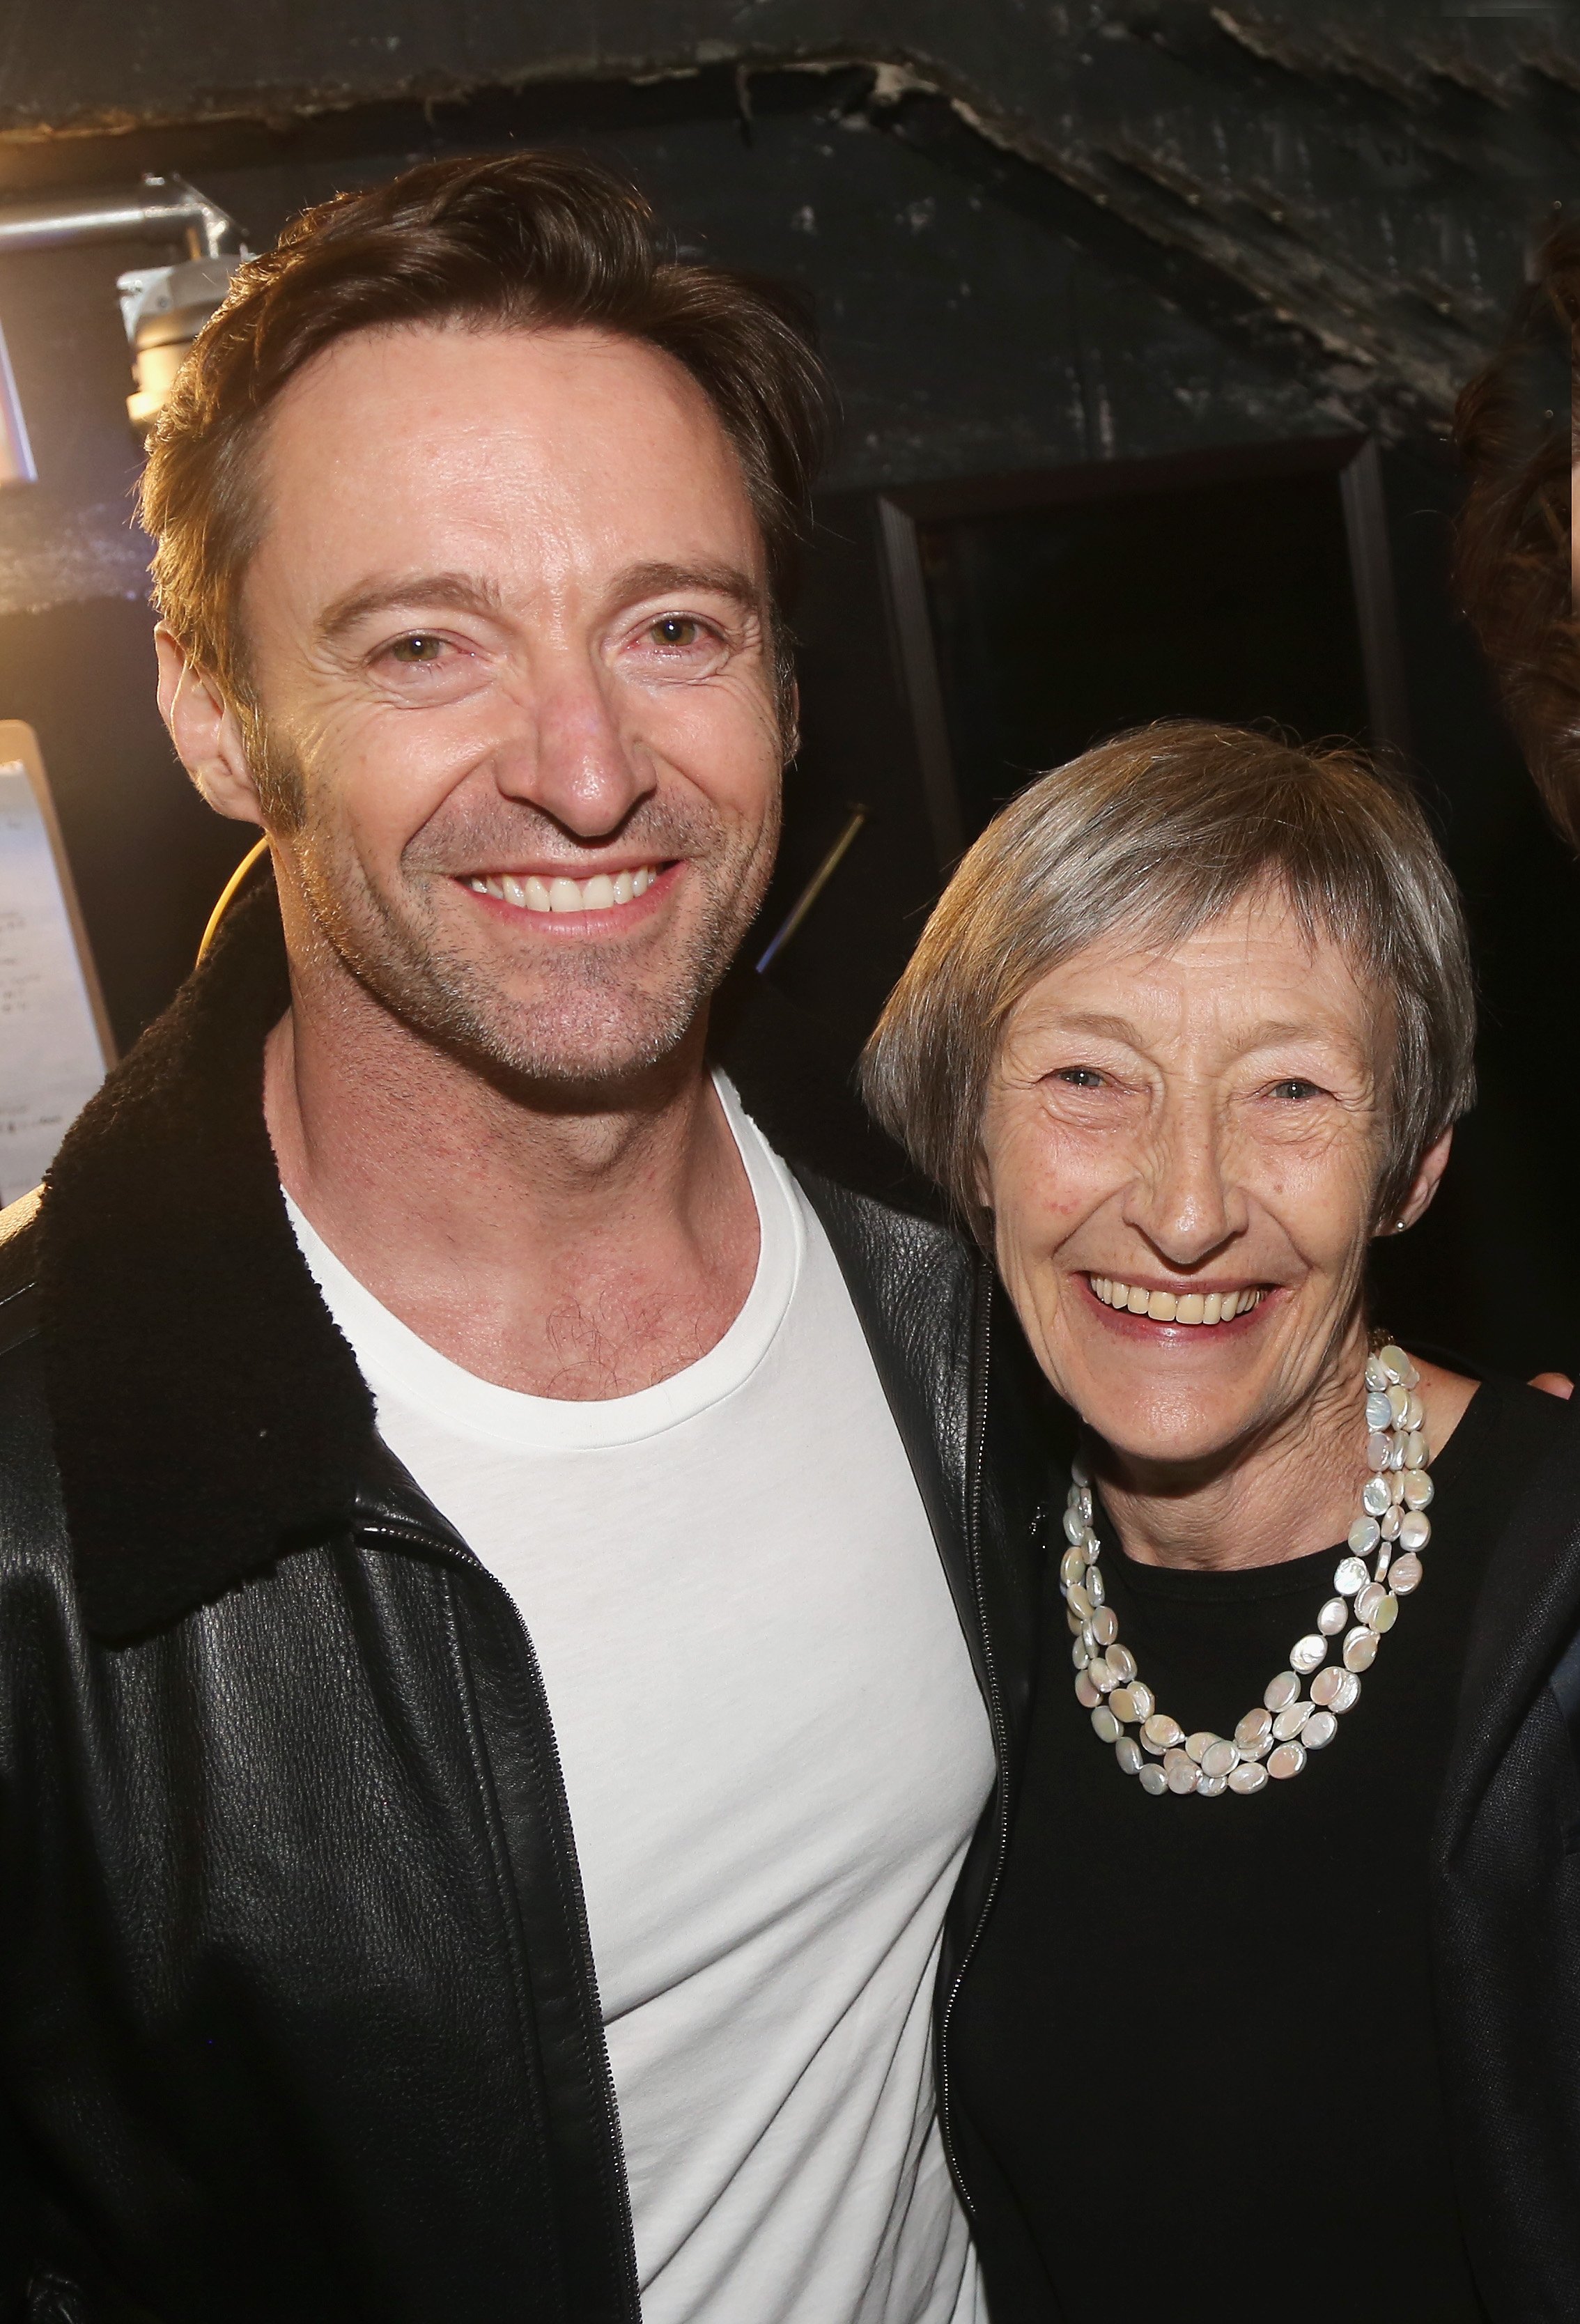 Hugh Jackman and mother Grace McNeil at the hit musical "Sunday in The Park with George" on Broadway at The Hudson Theatre in New York City | Photo: Bruce Glikas//FilmMagic via Getty Images